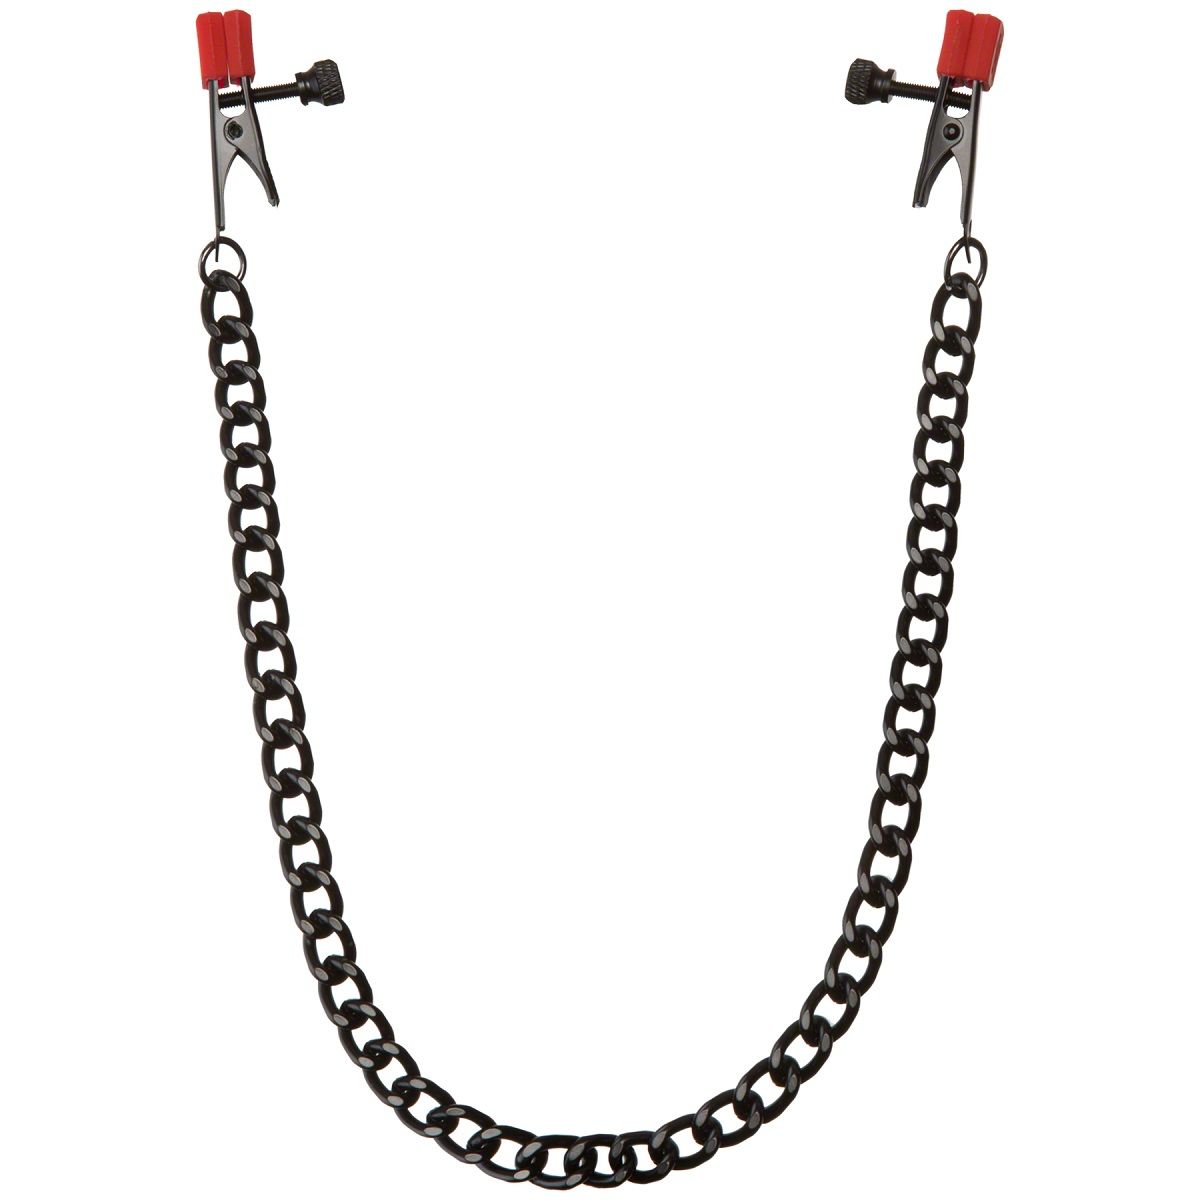    Kink Nipple Clips with Heavy Chain and Silicone Tips